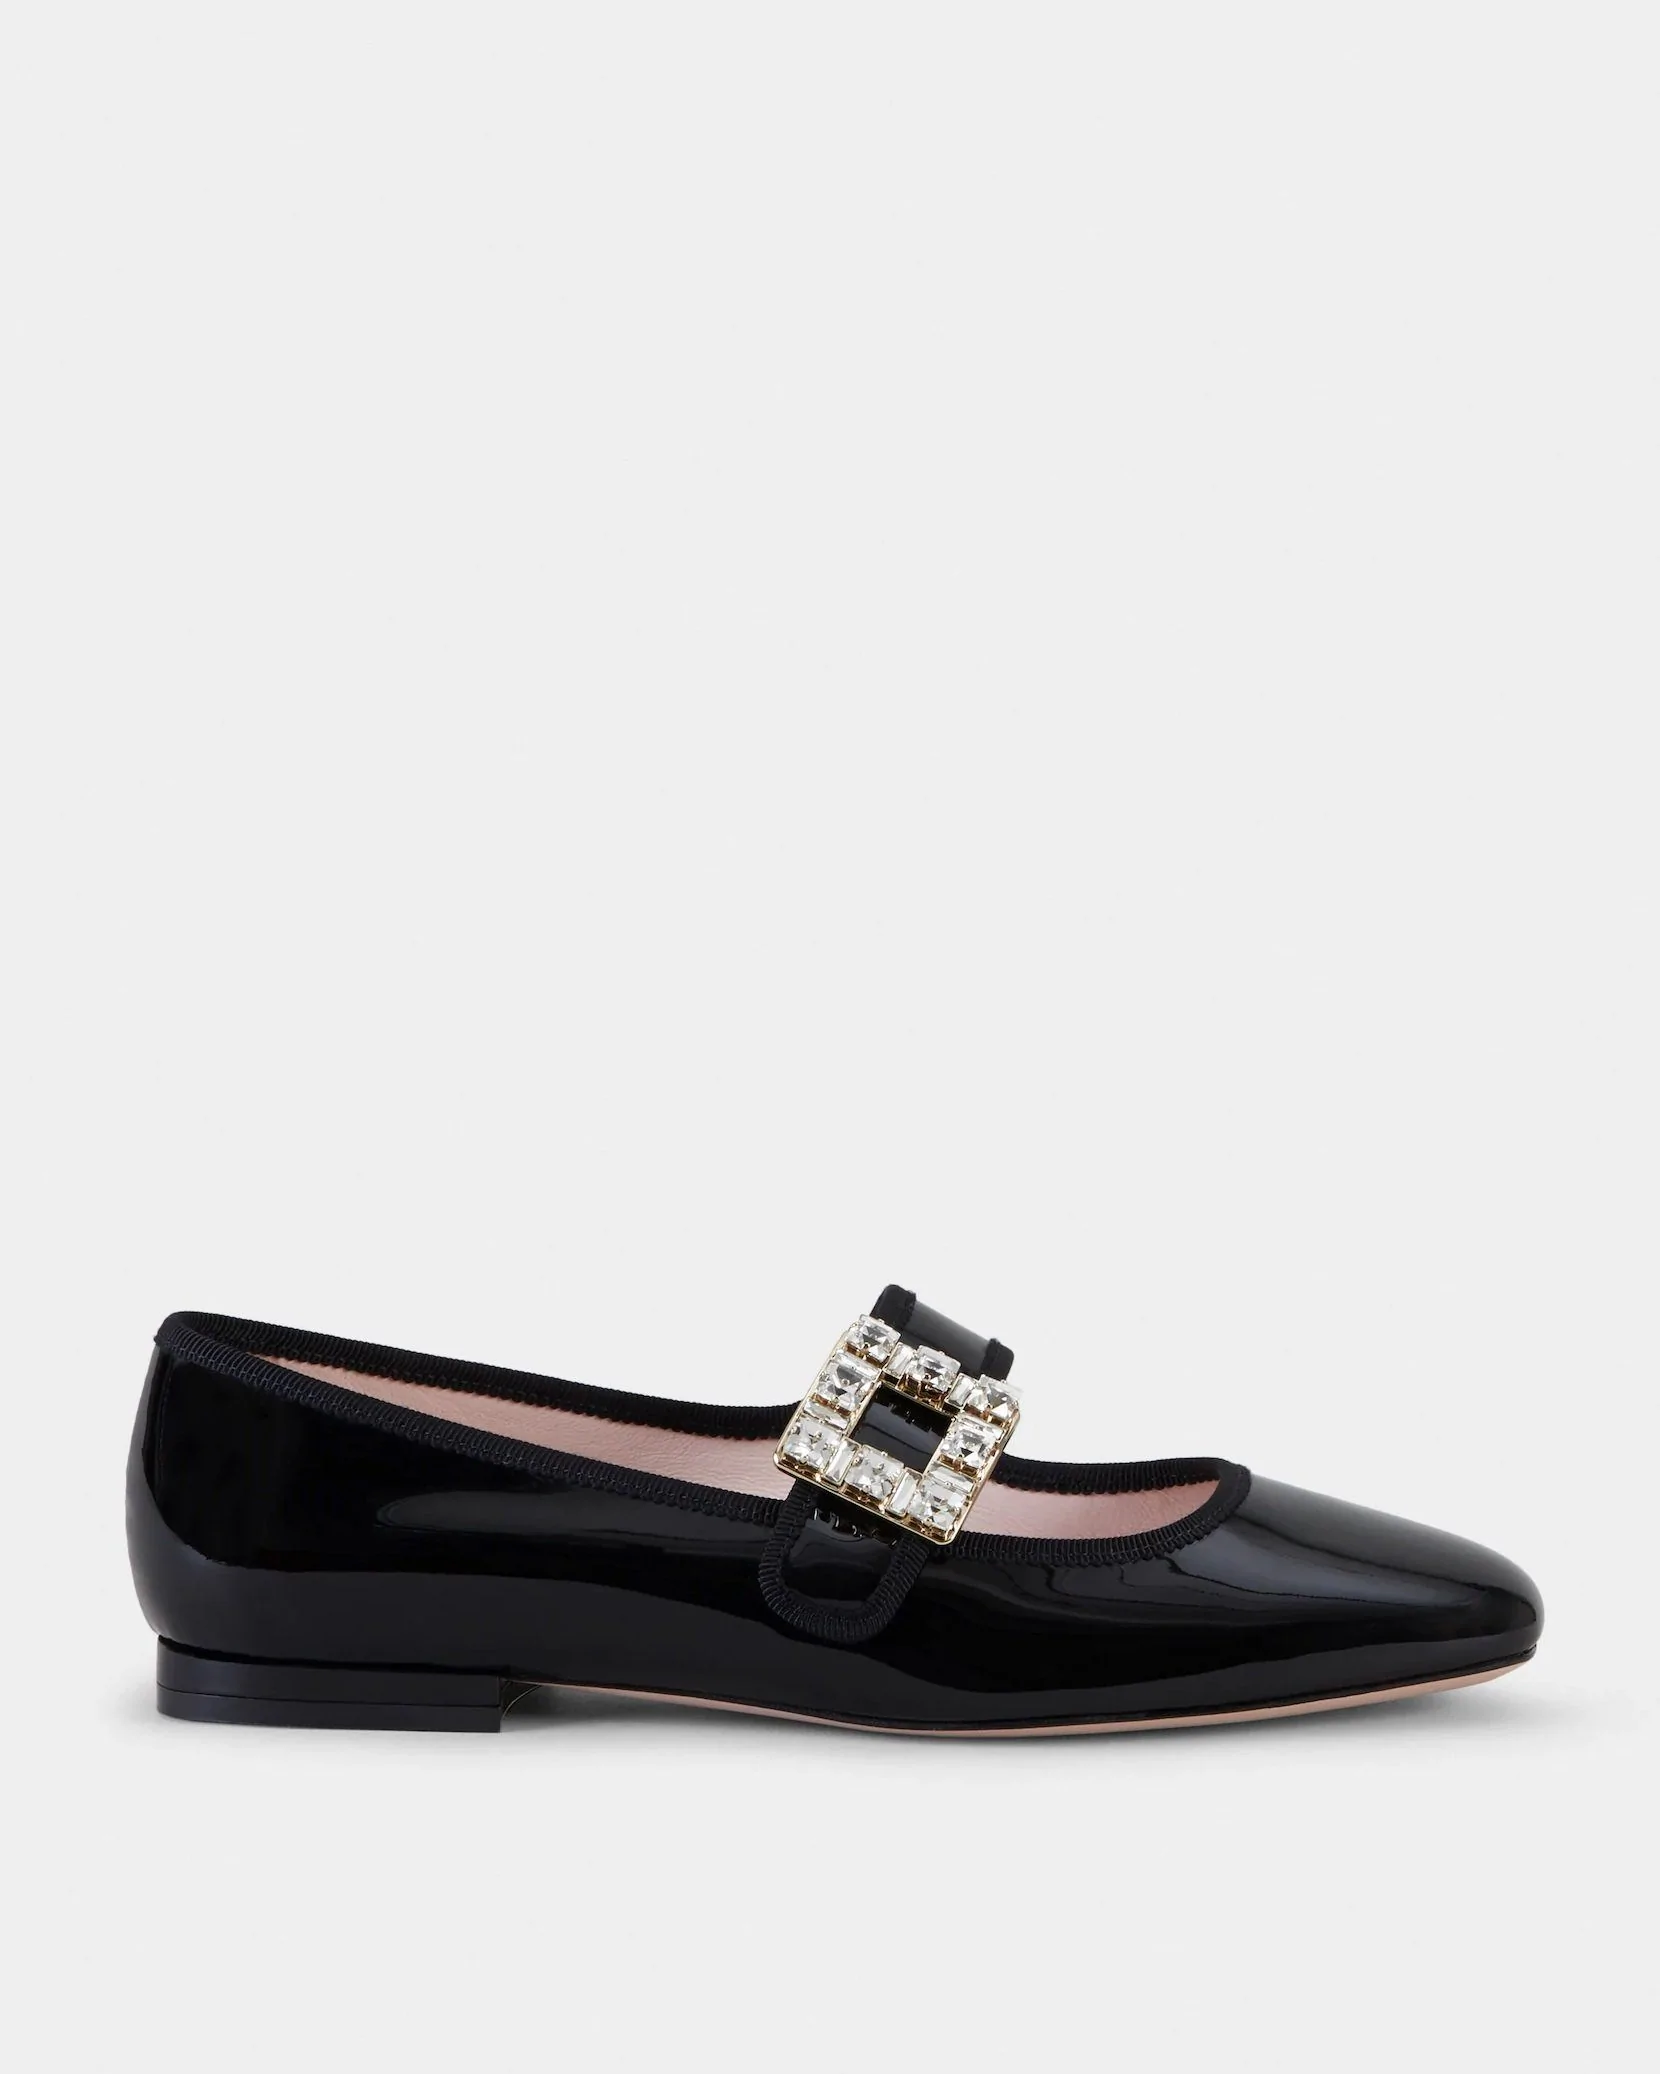 Roger Vivier Très Vivier Strass Buckle Babies Ballerinas in Patent Leather